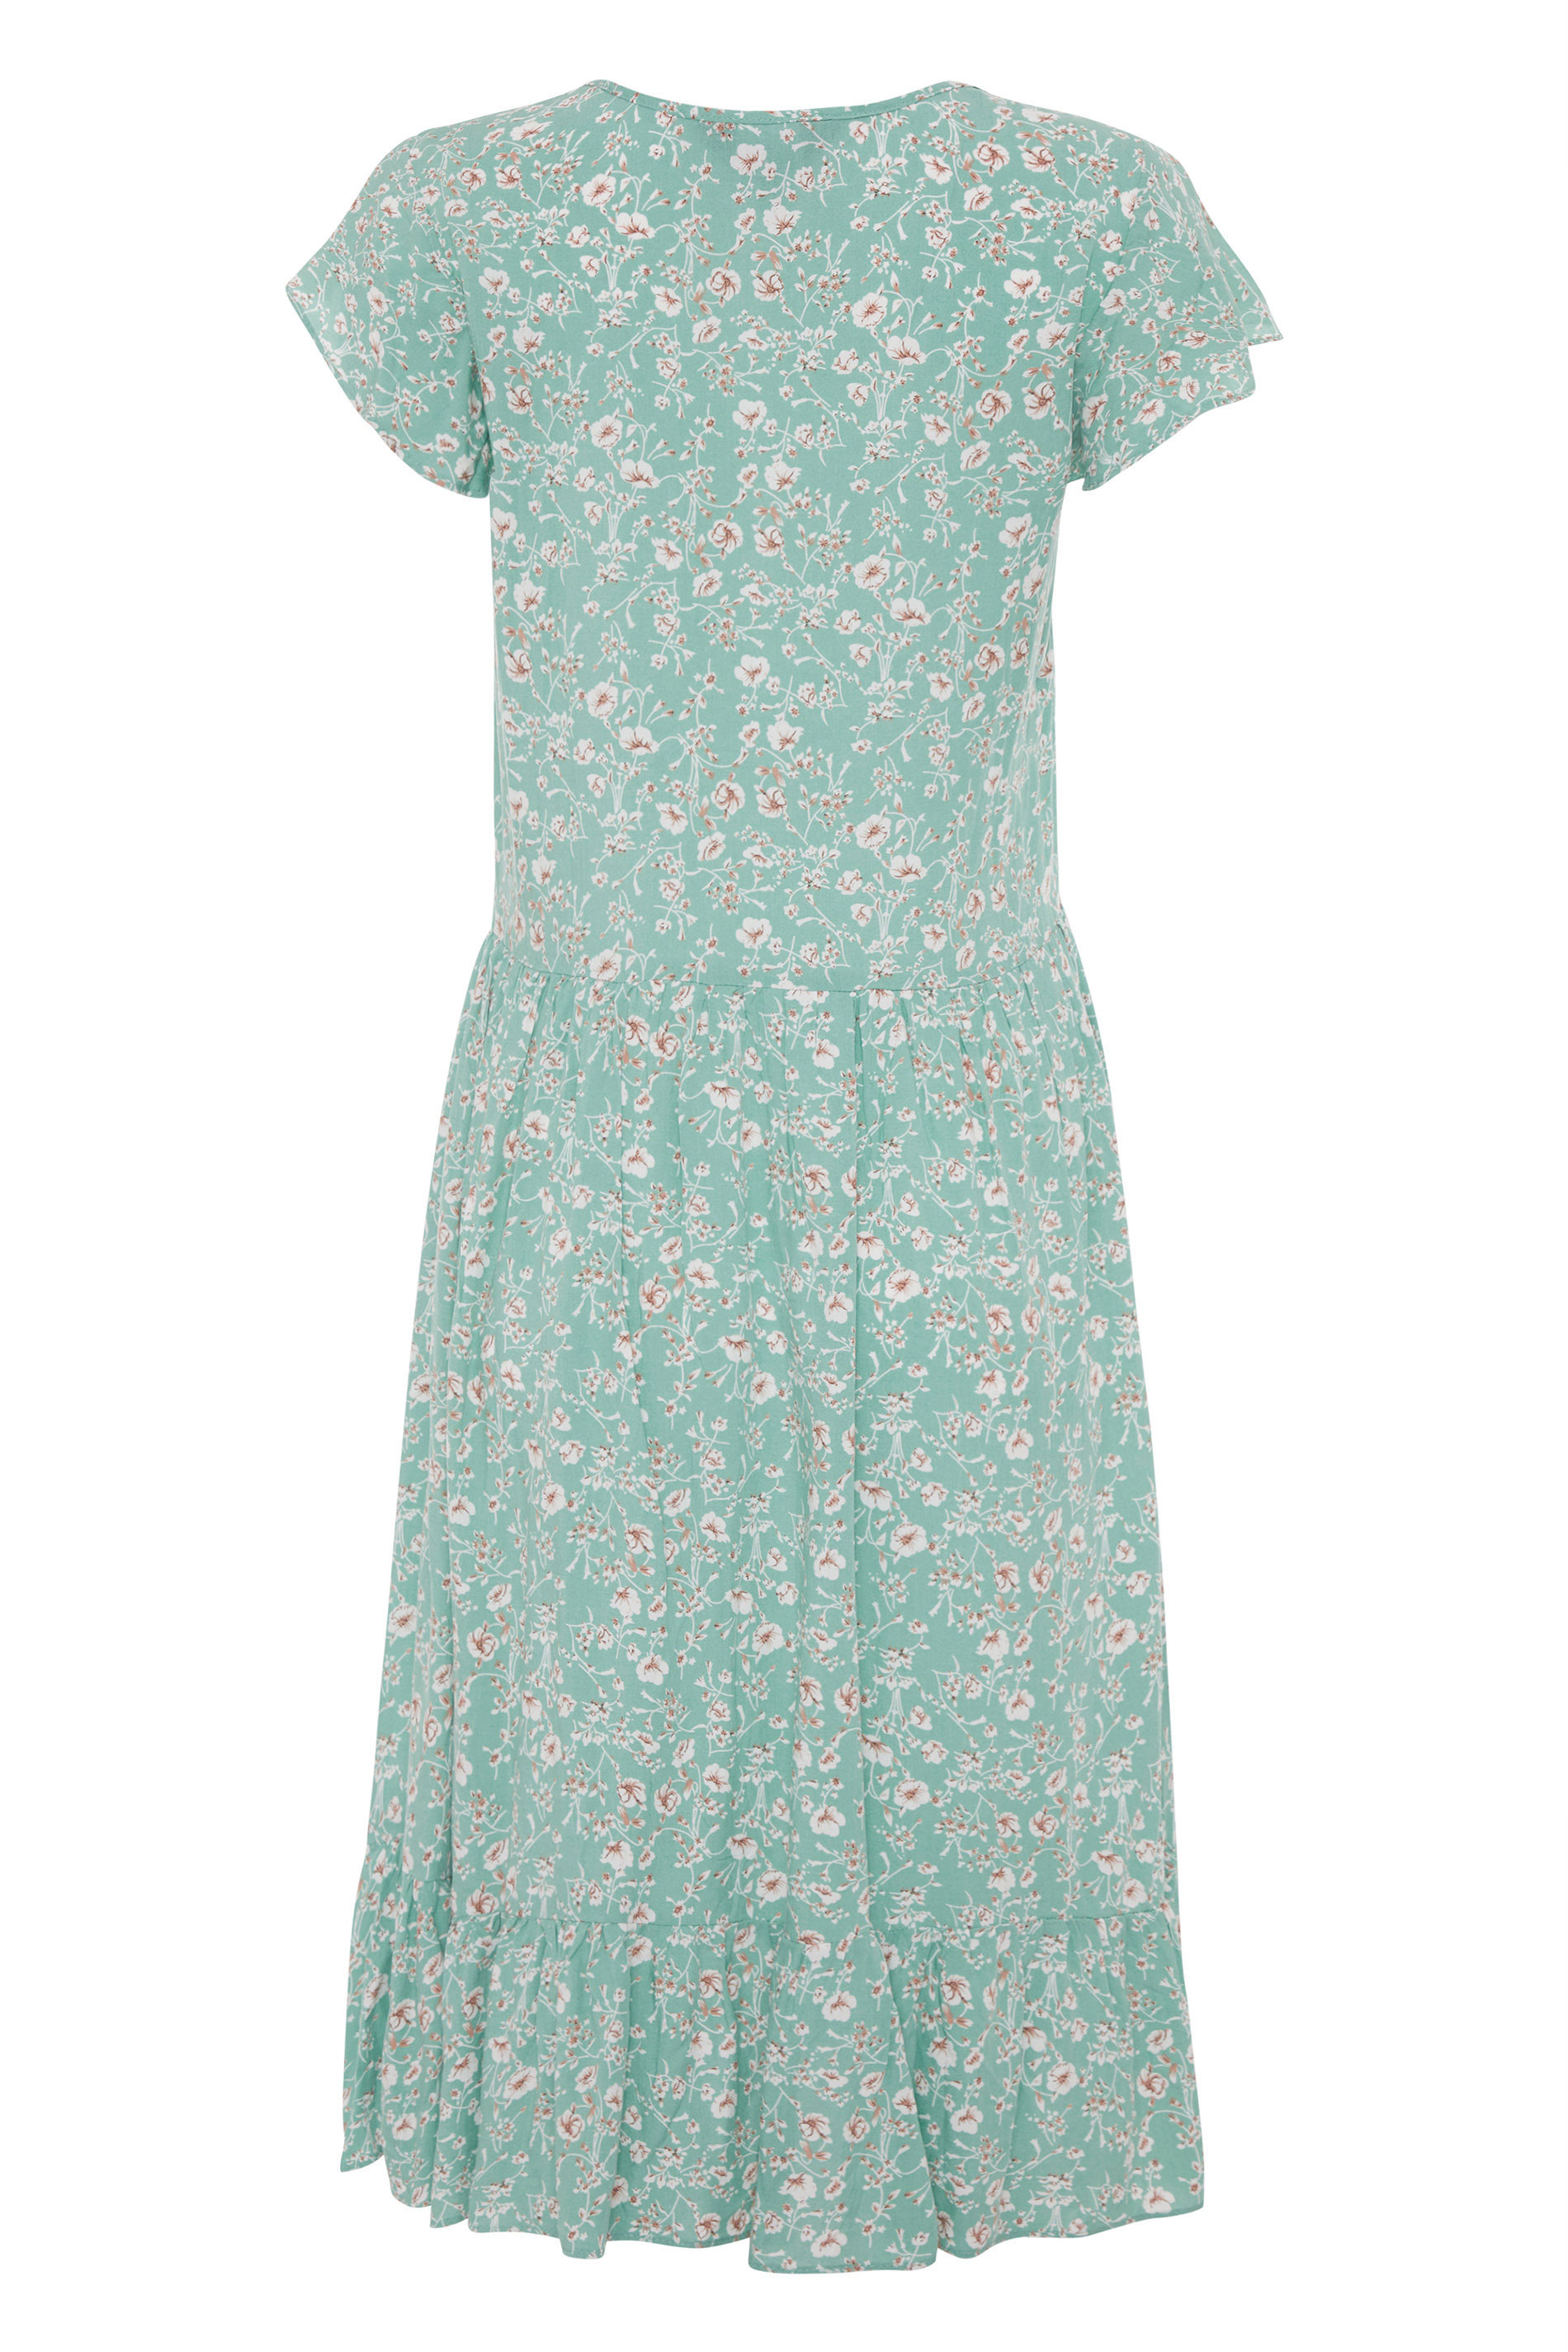 LTS Turquoise Floral Angel Sleeve Dress | Long Tall Sally